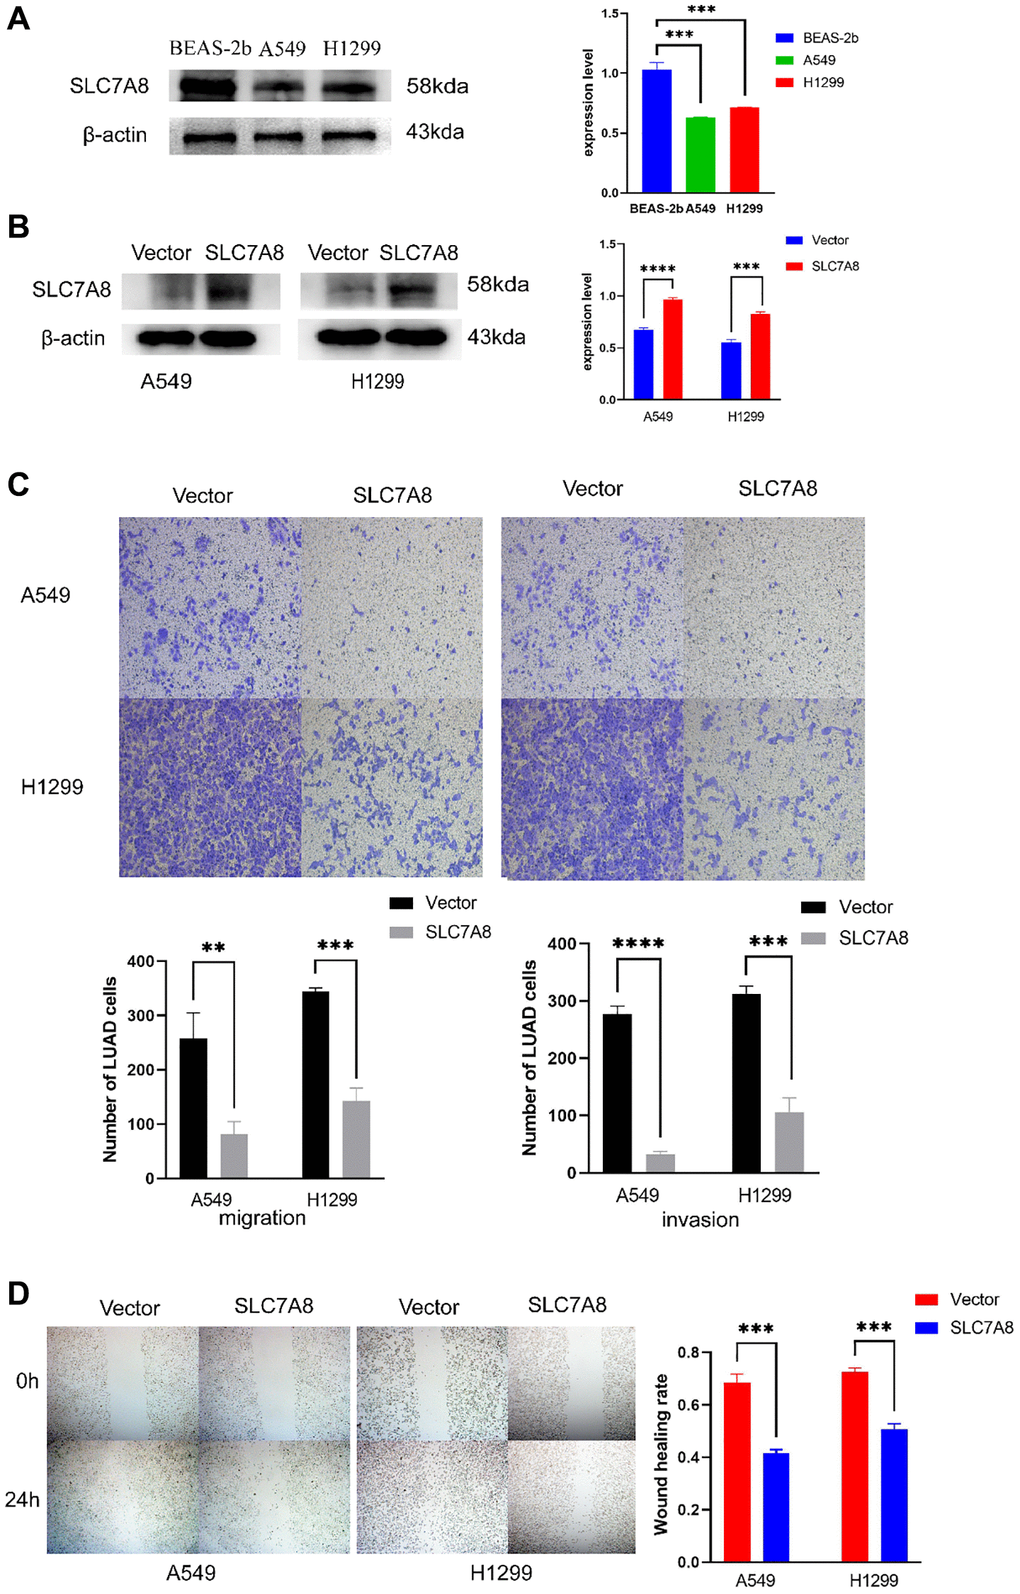 Overexpression of SLC7A8 suppresses the migration and invasion of LUAD. (A) The expression level of SLC7A8 in BEAS-2B, A549, and H1299 cells. (B) The protein expression levels were determined by Western blotting. (C) The migration and invasion were assessed using Transwell assays. (D) The migration ability was determined using wound healing assays as well.